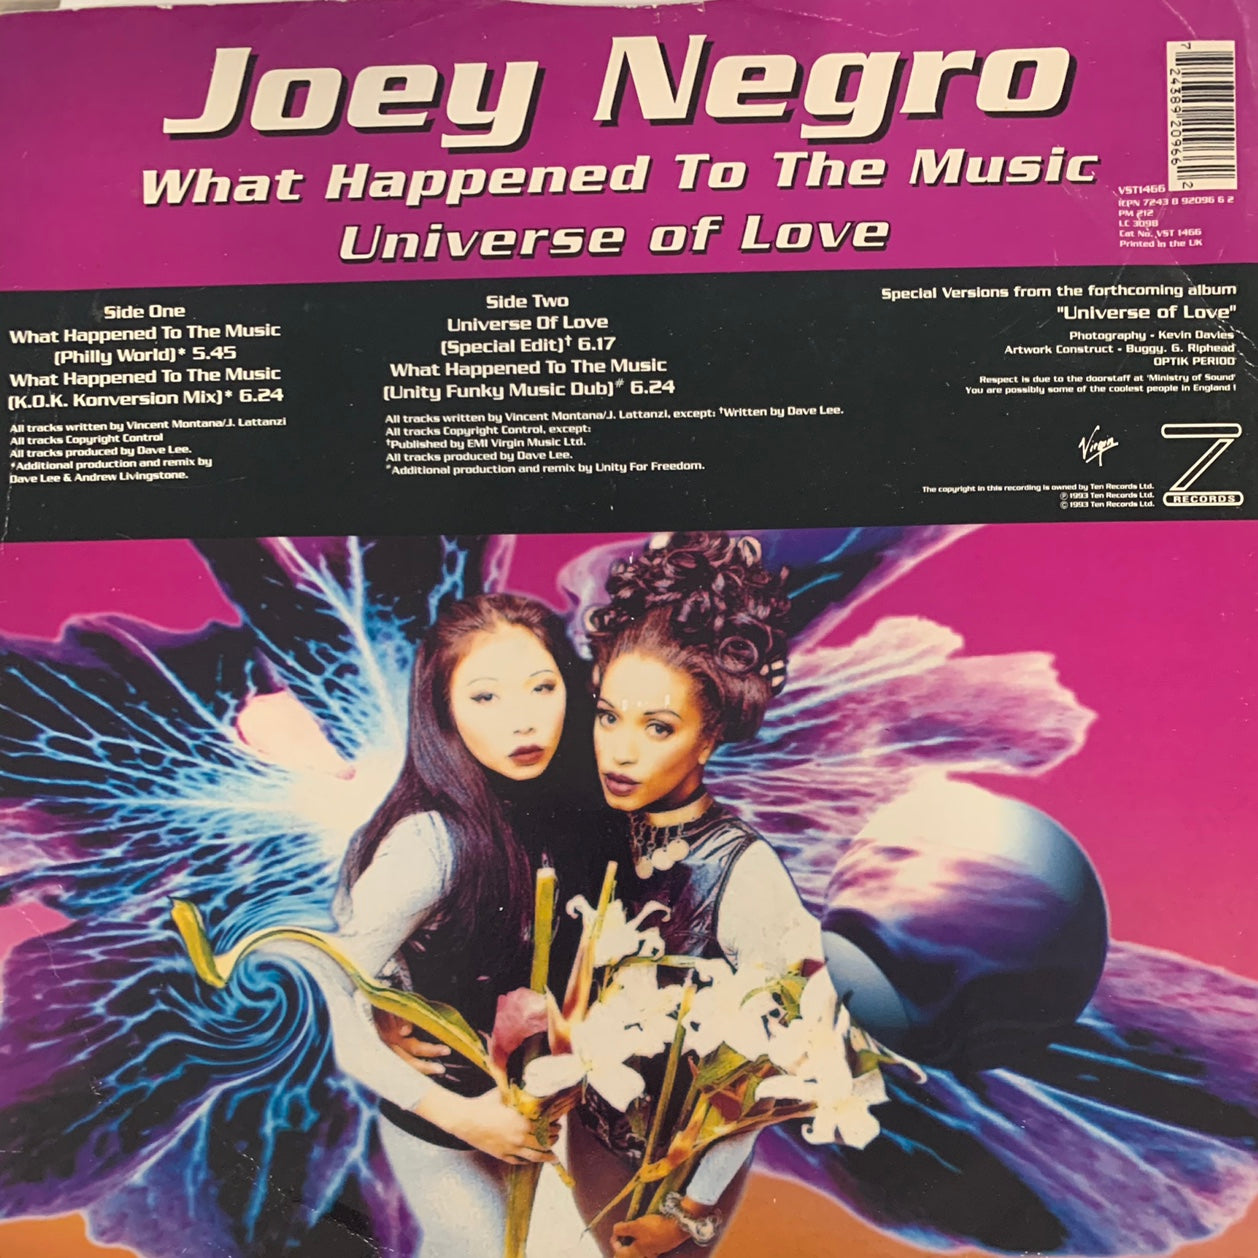 Joey Negro “What The Happened To The Music” / “Universe of Love” 4 Track 12inch Vinyl